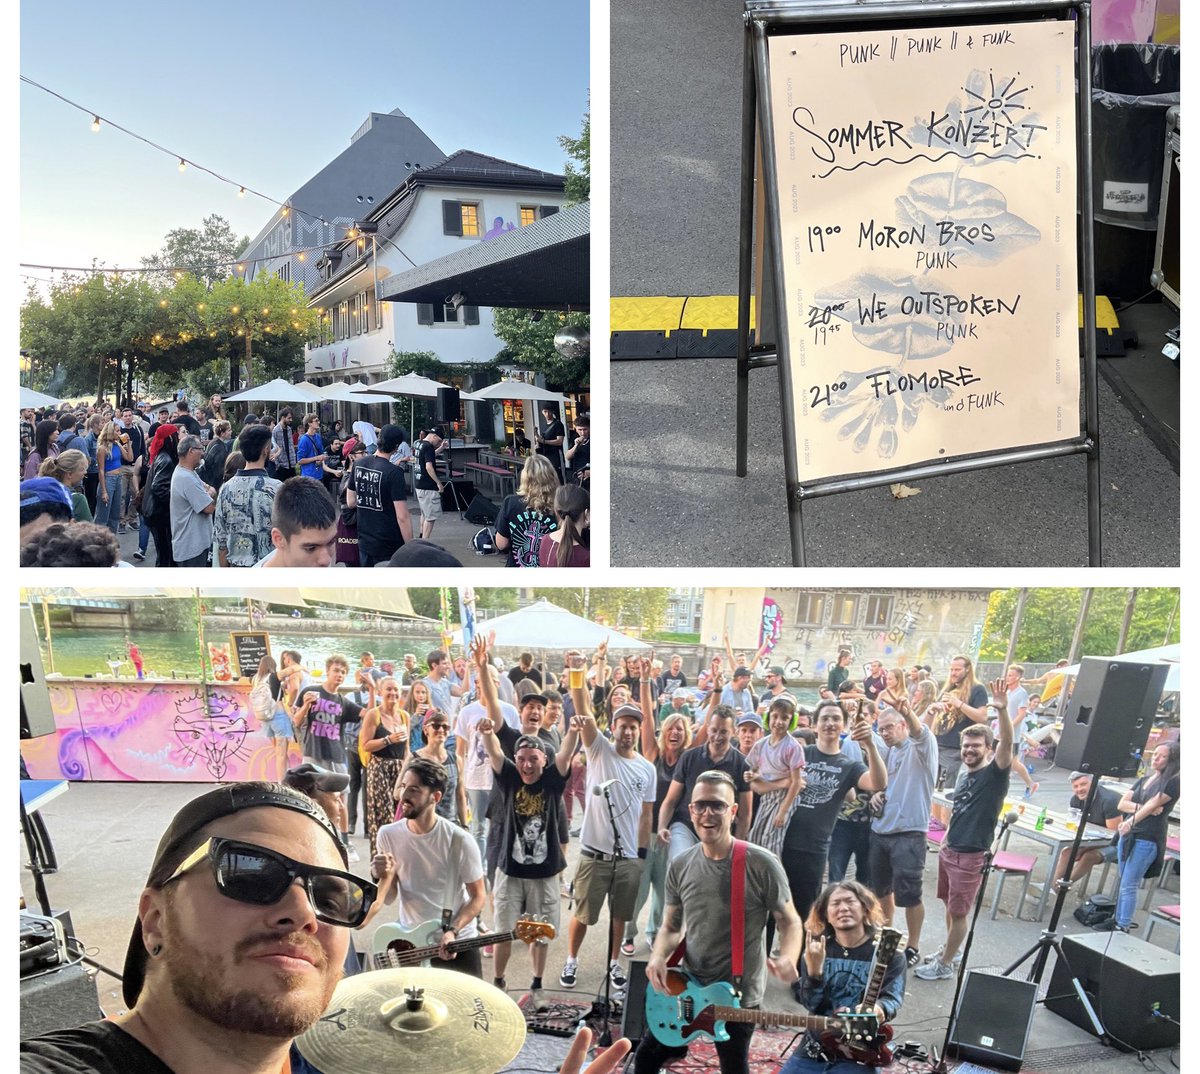 Zurich! That was incredible! We played outside with Moron Bros and Flomore it was incredible. Thanks for having us back. Tomorrow we play in Verona, Italy with Apart of us! @akira_stoneleek